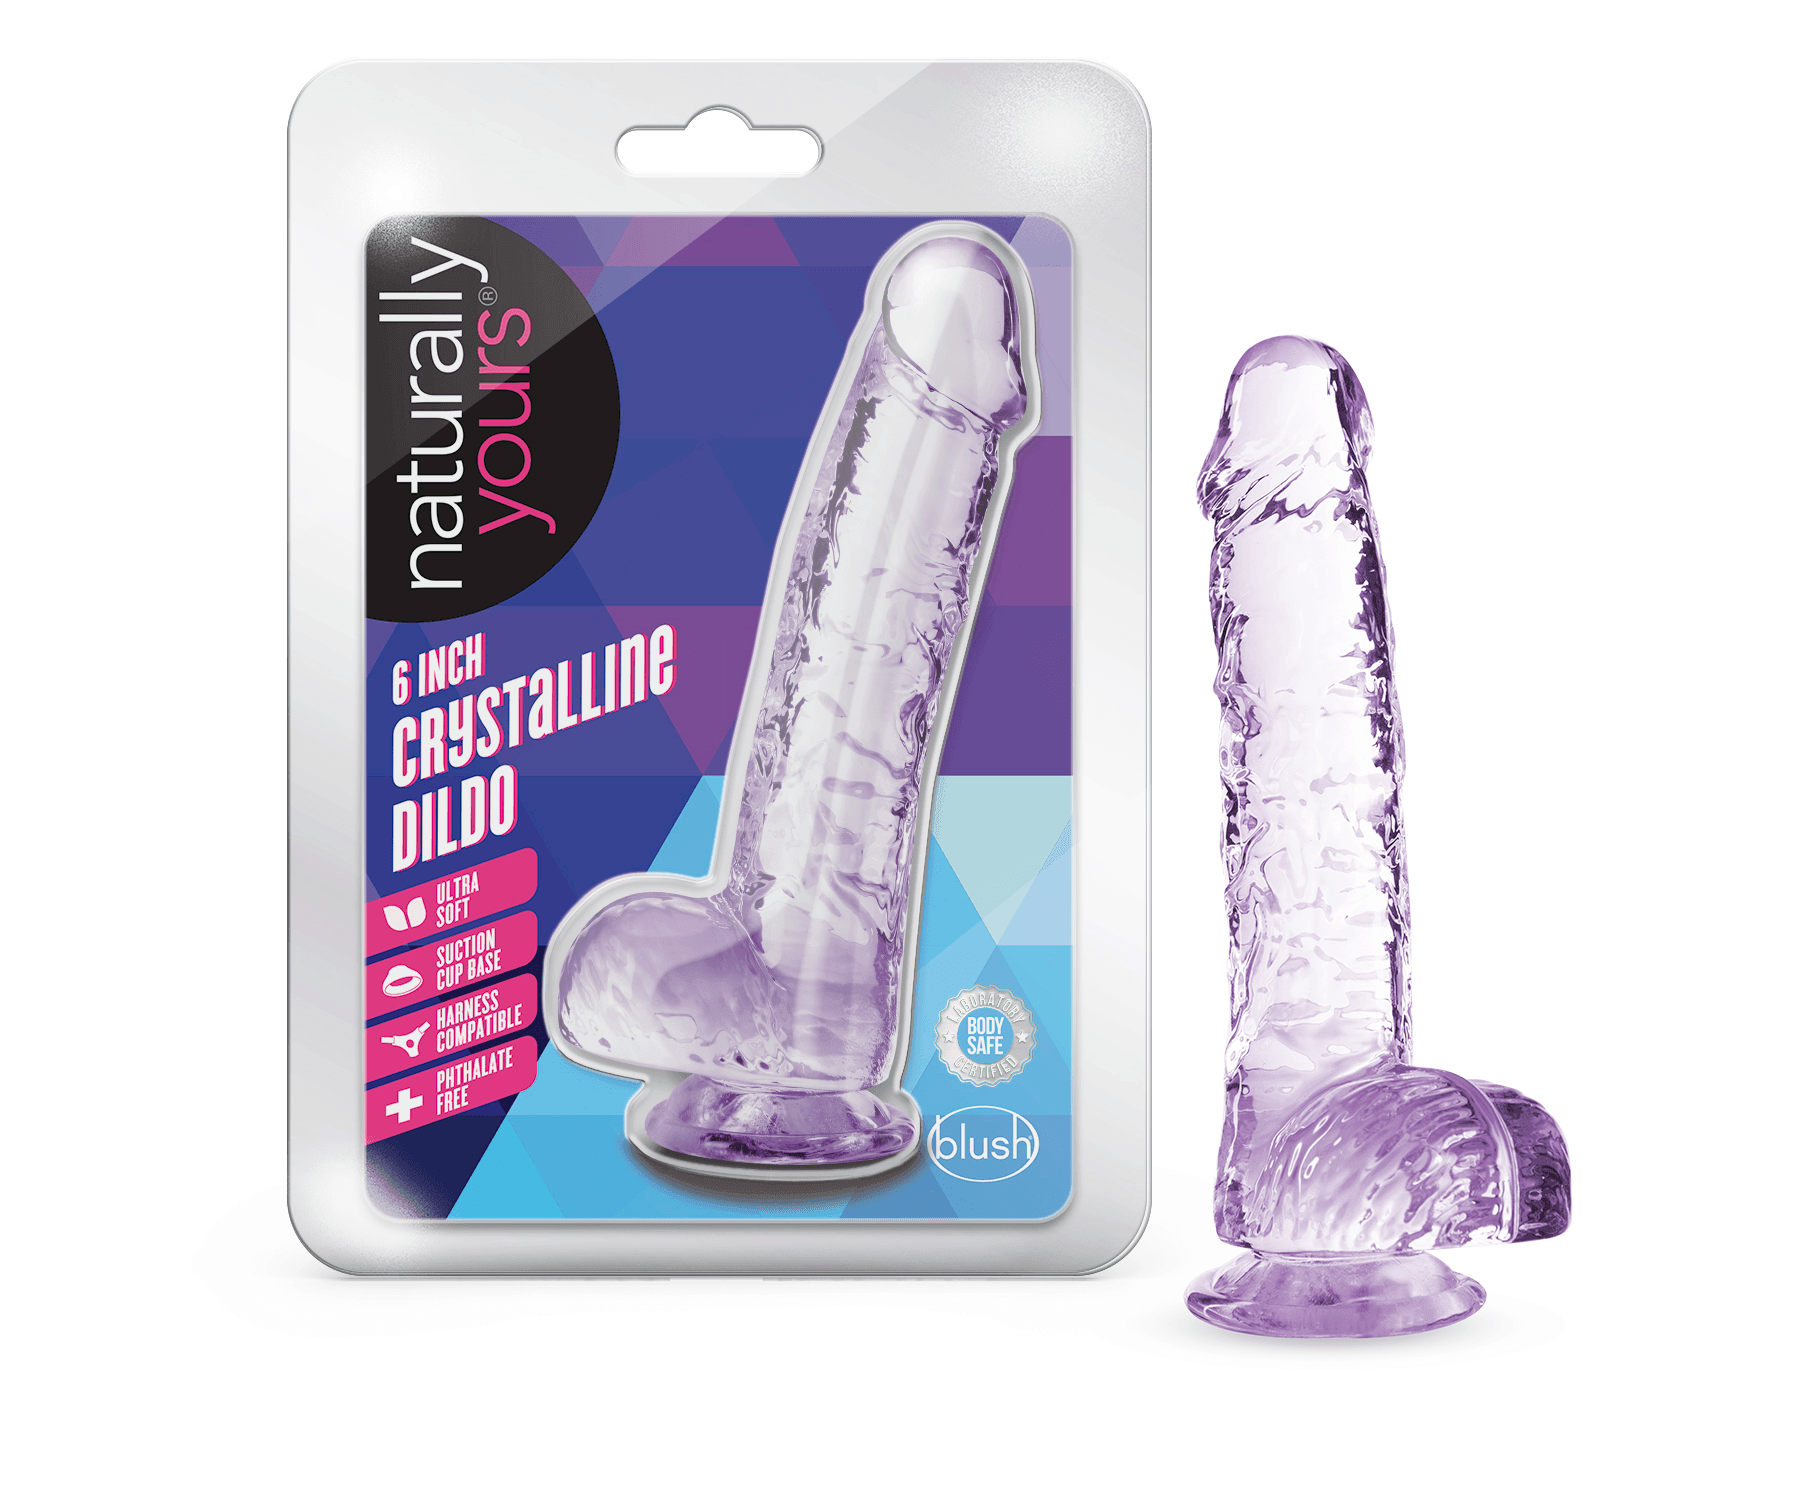 Naturally Yours - 6 Inch Crystalline Dildo - Amethyst - My Sex Toy Hub